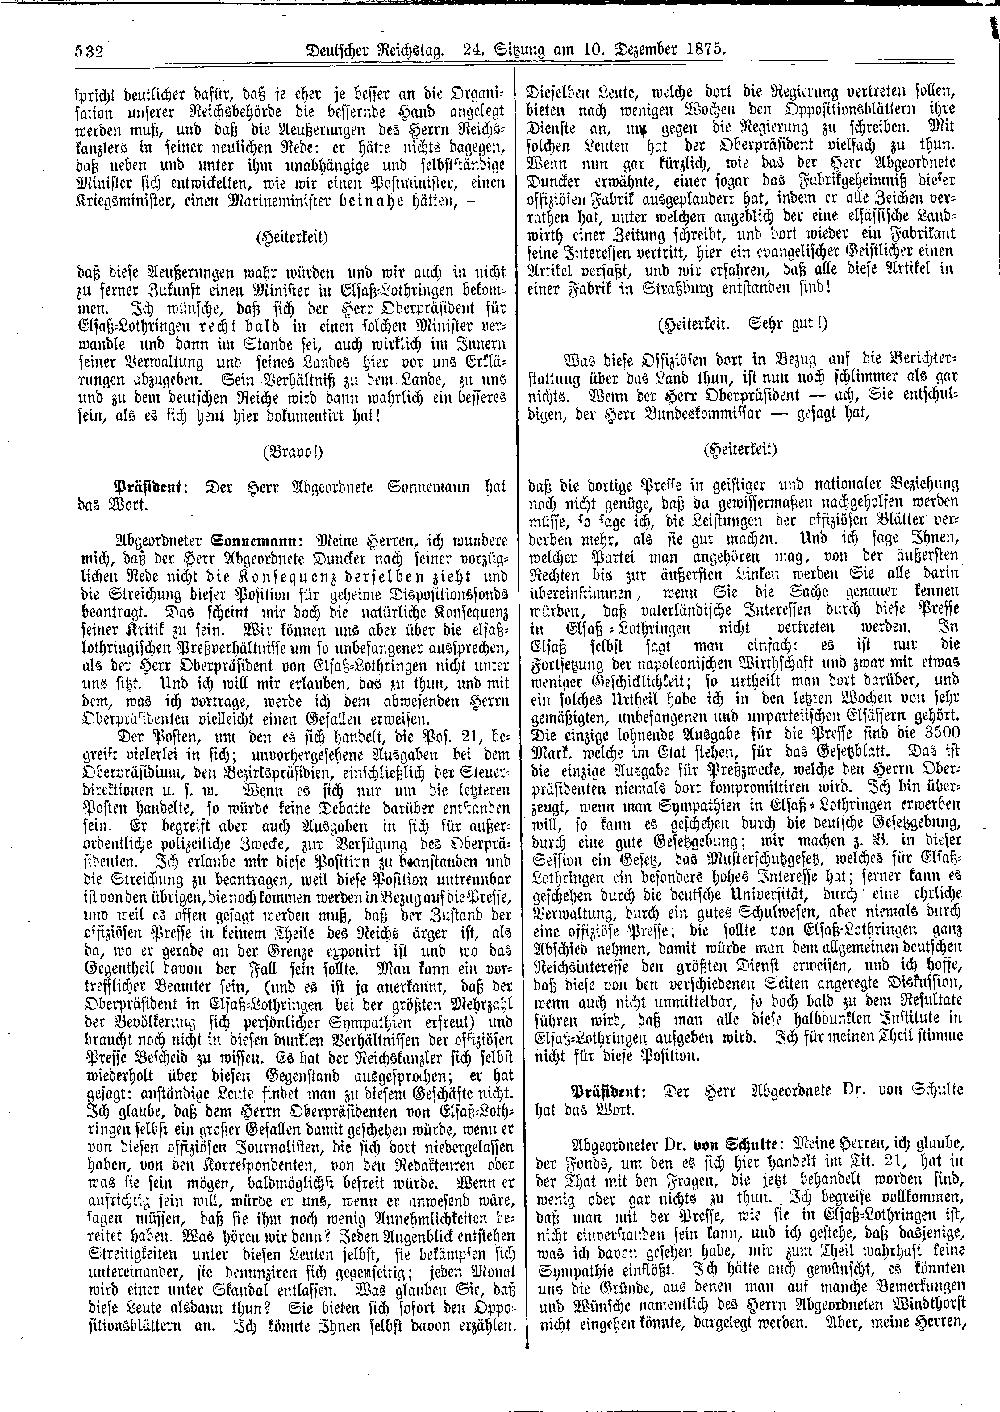 Scan of page 532